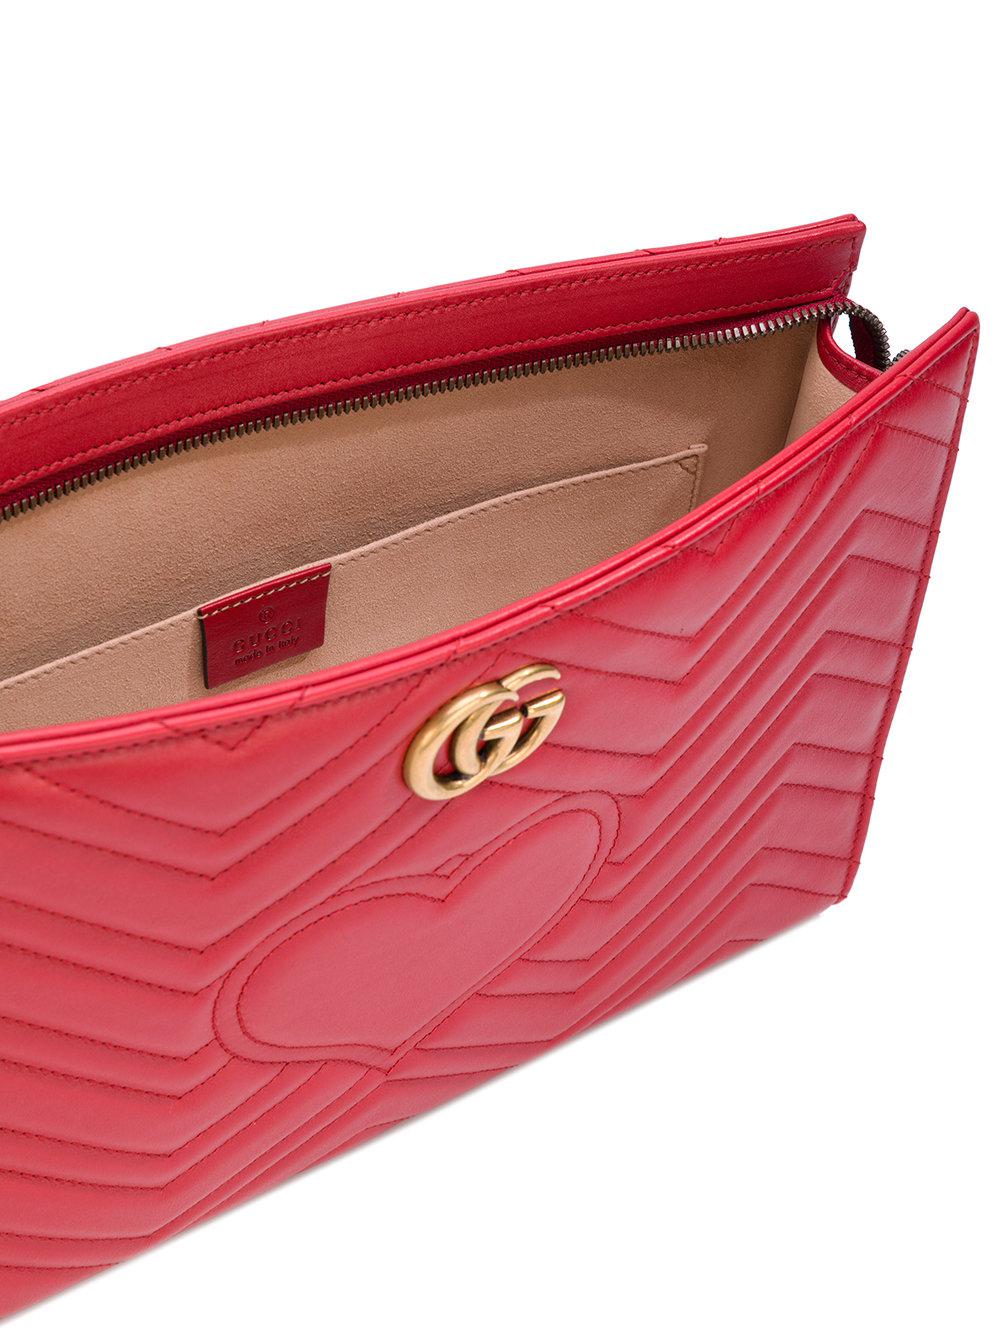 Gucci Leather Gg Marmont Clutch Bag in Red - Lyst